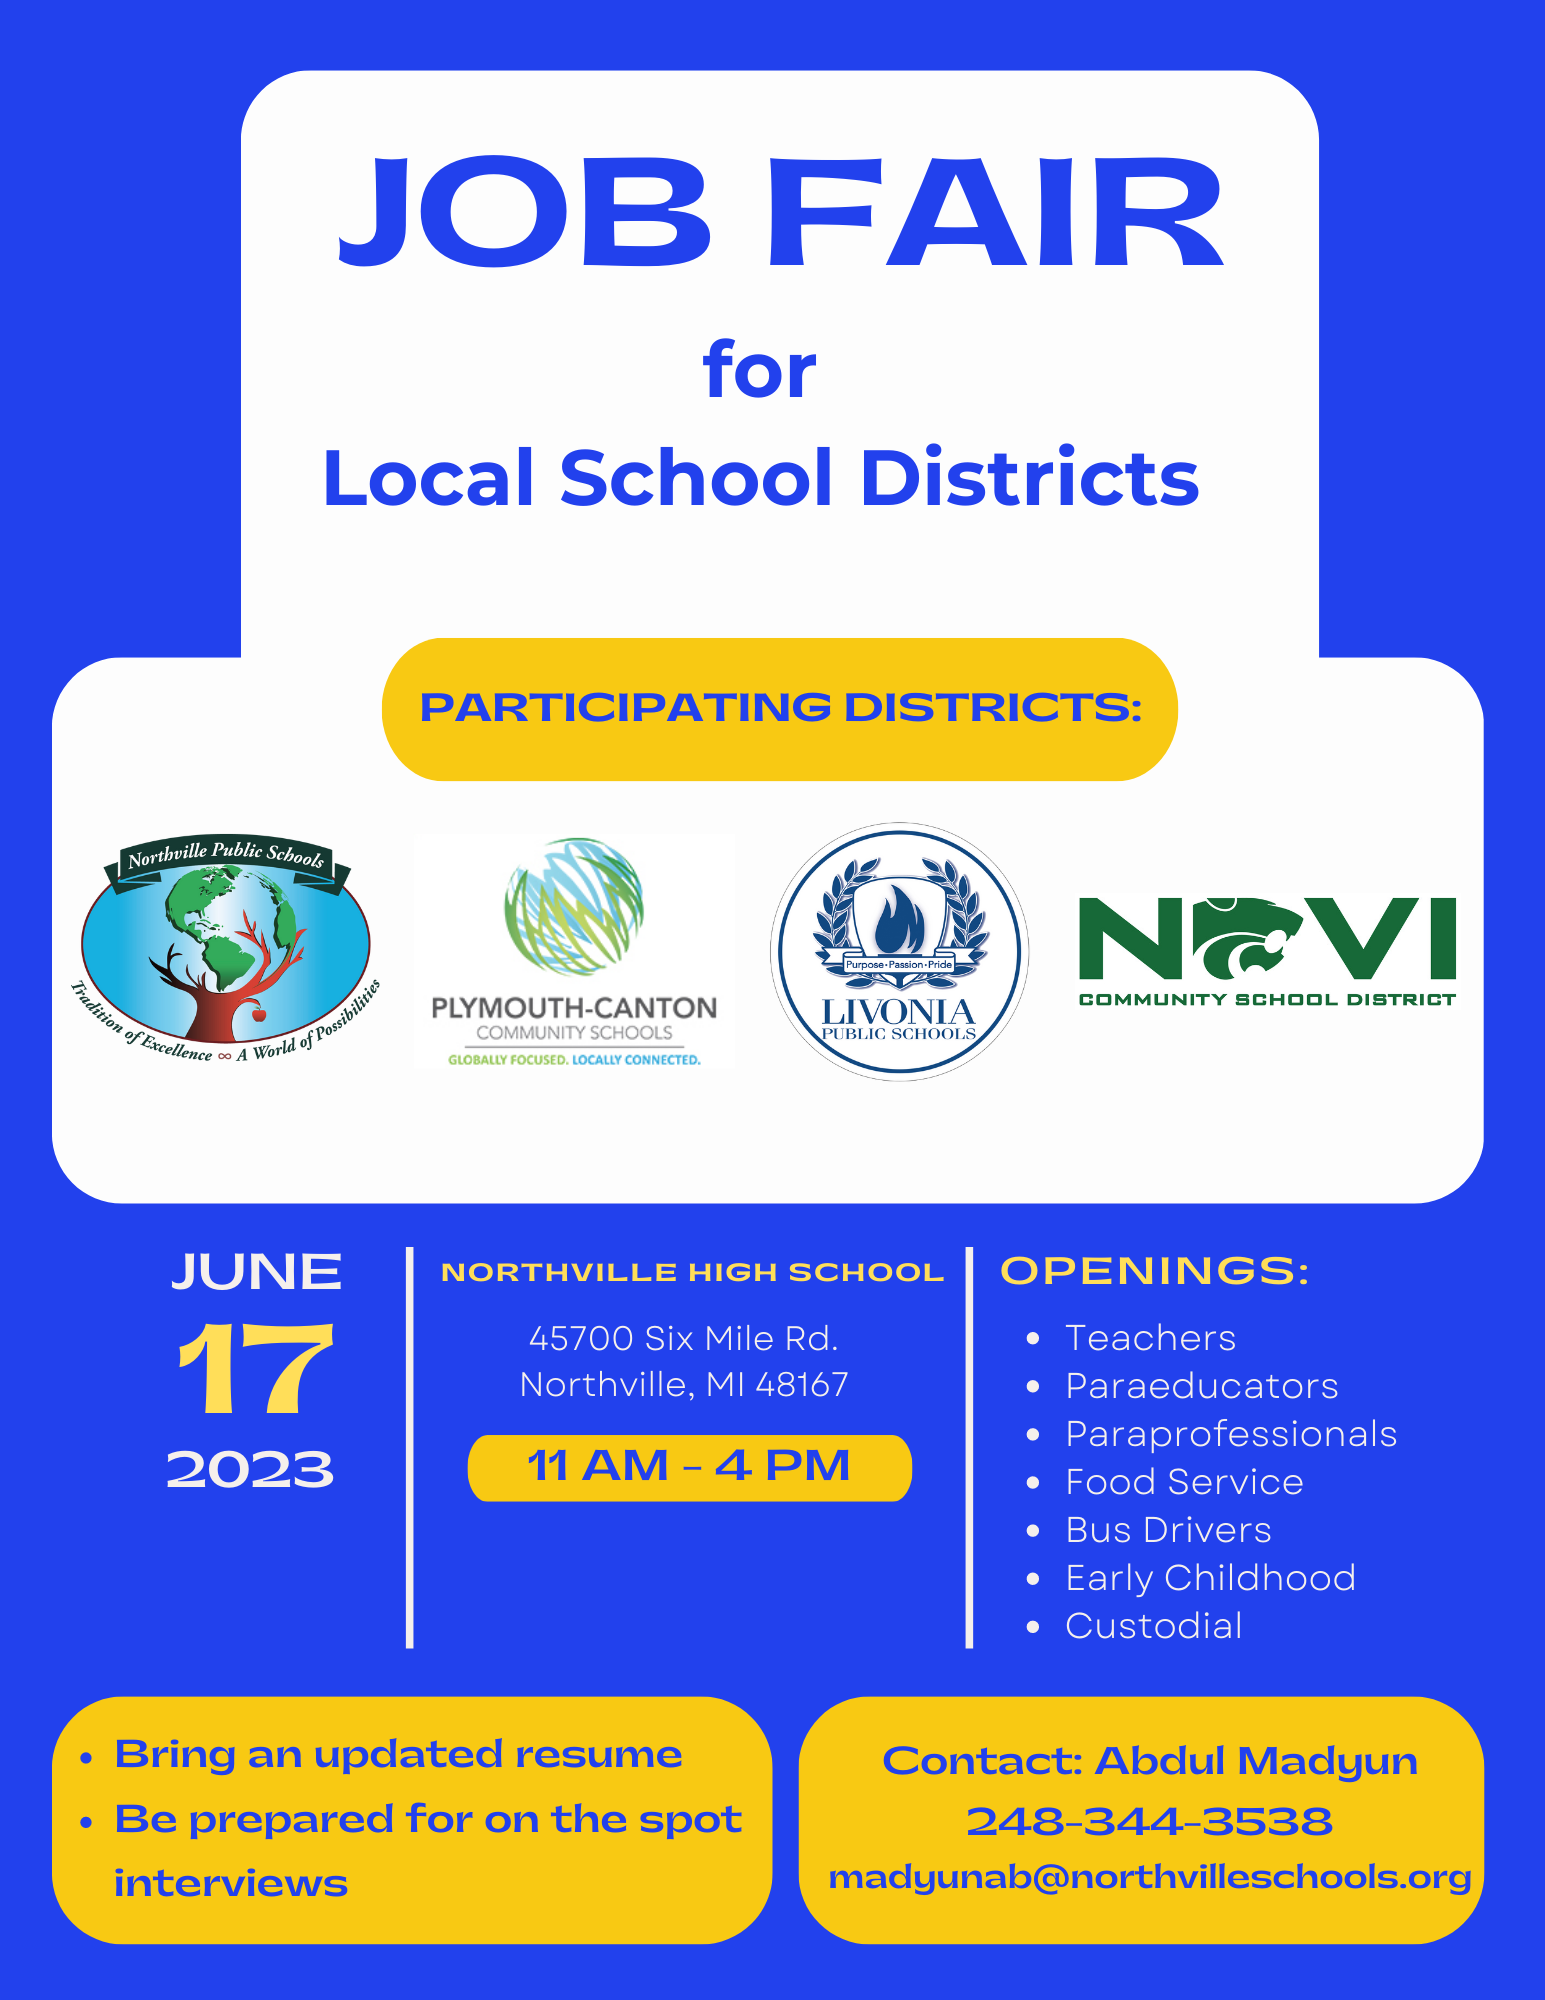 Job Fair for Local School Districts - Participating Districts: Northville Public Schools, Plymouth-Canton Community Schools, Livonia Public Schools, Novi Community School District - June 17, 2023 at Northville High School: 45700 Six Mile Rd. Northville, MI 48167 from 11am-4pm. Openings: teachers, paraeducators, paraprofessionals, food service, bus drivers, early childhood, custodial. Bring an updated resume. Be prepared for on the spot interviews. Contact: Abdul Madyun at 248-344-3538 or email madyunab@northvilleschools.org 